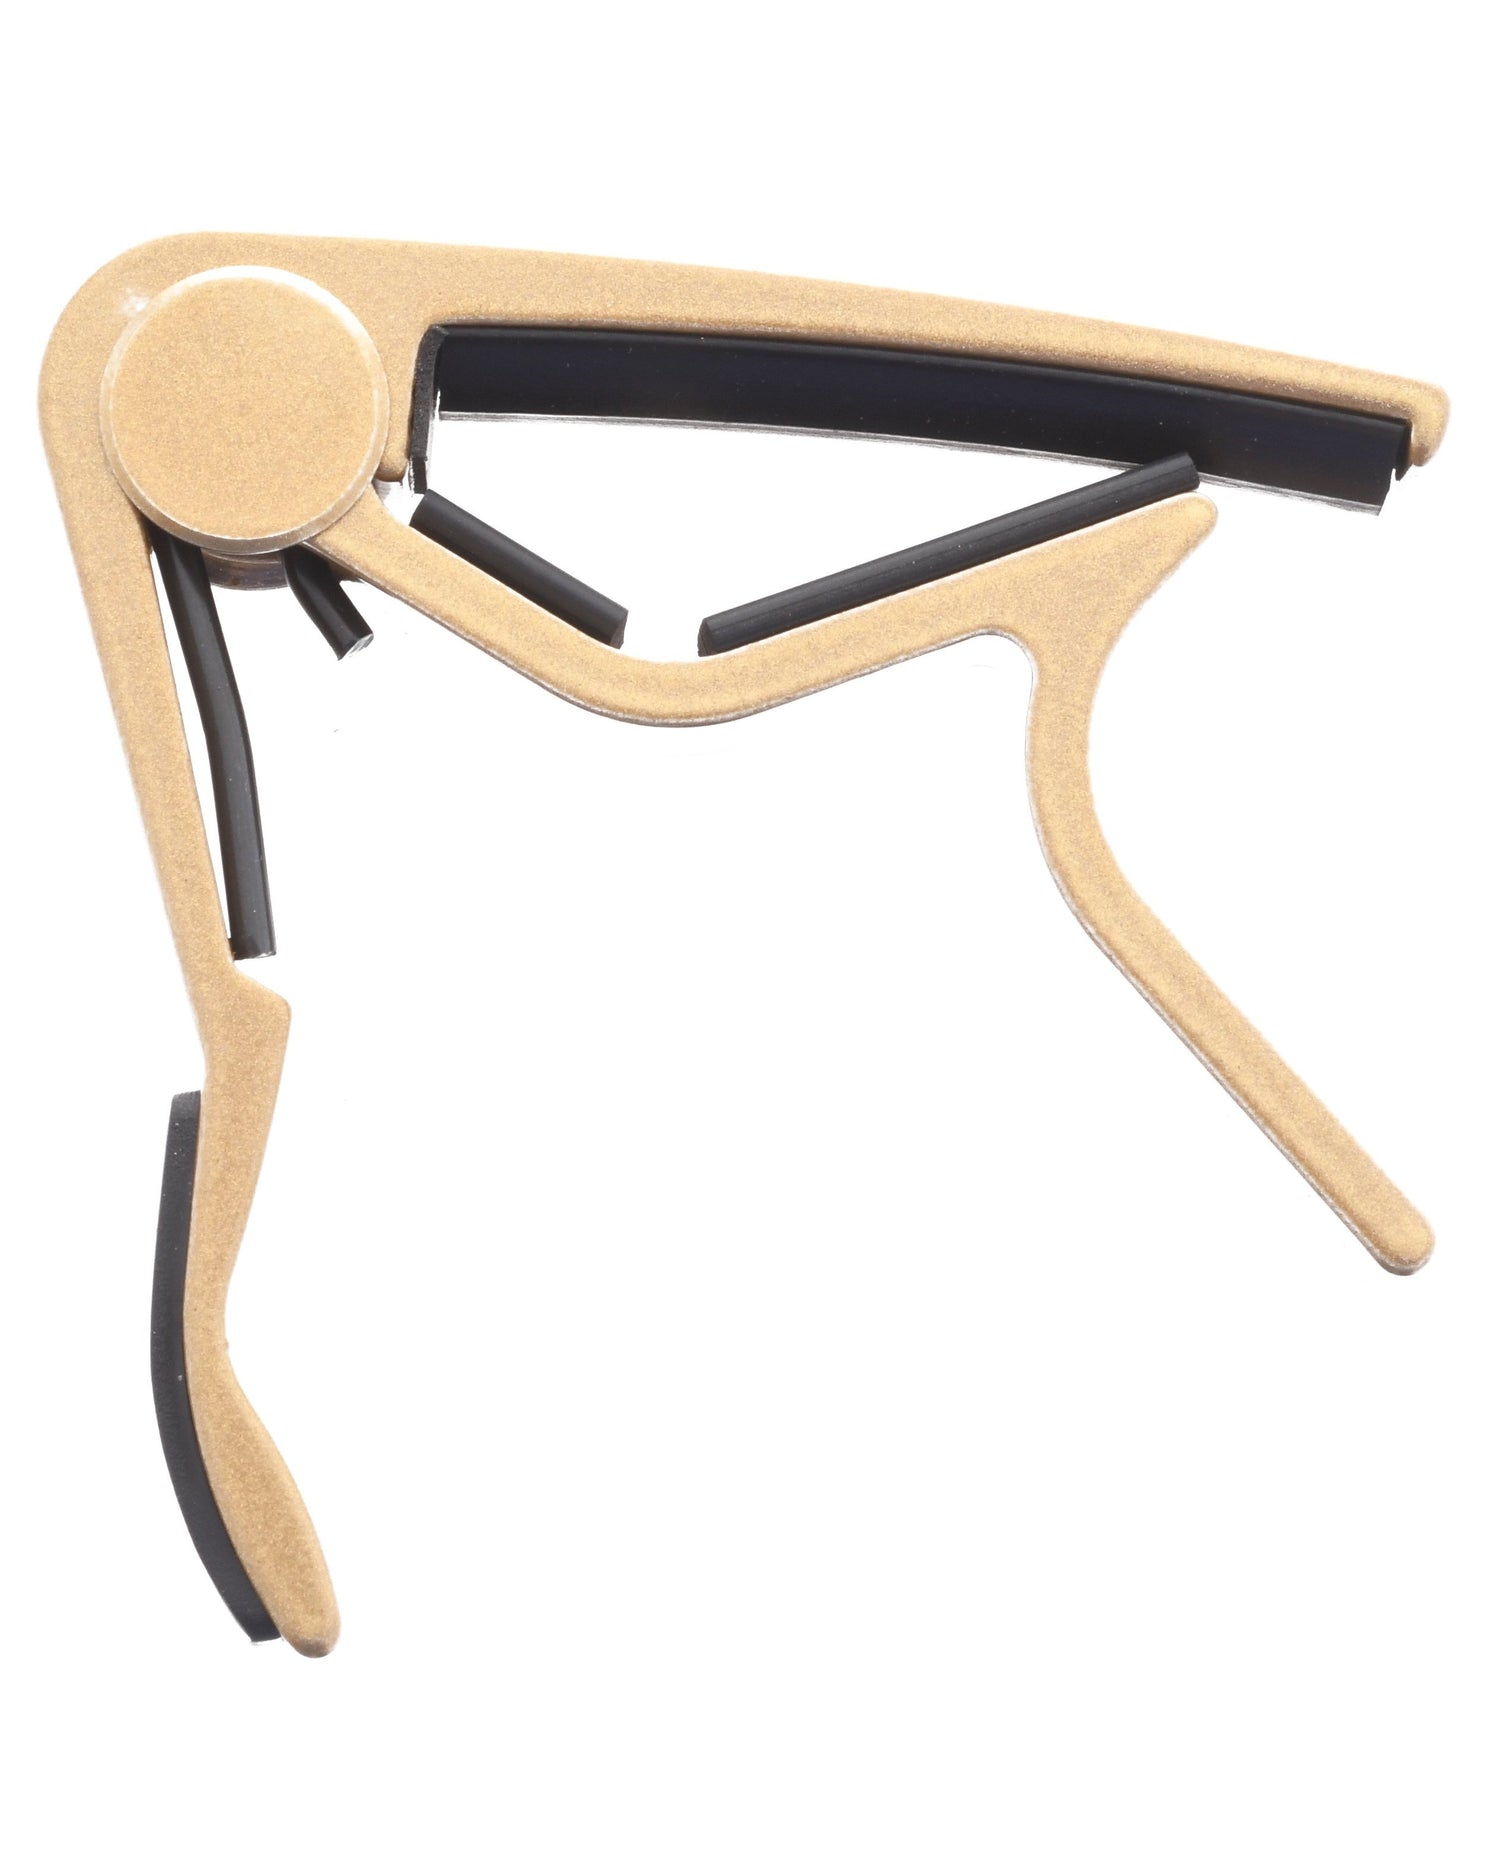 Image 1 of Dunlop 83CG Trigger Acoustic Guitar Capo - SKU# TGC-GOLD : Product Type Accessories & Parts : Elderly Instruments